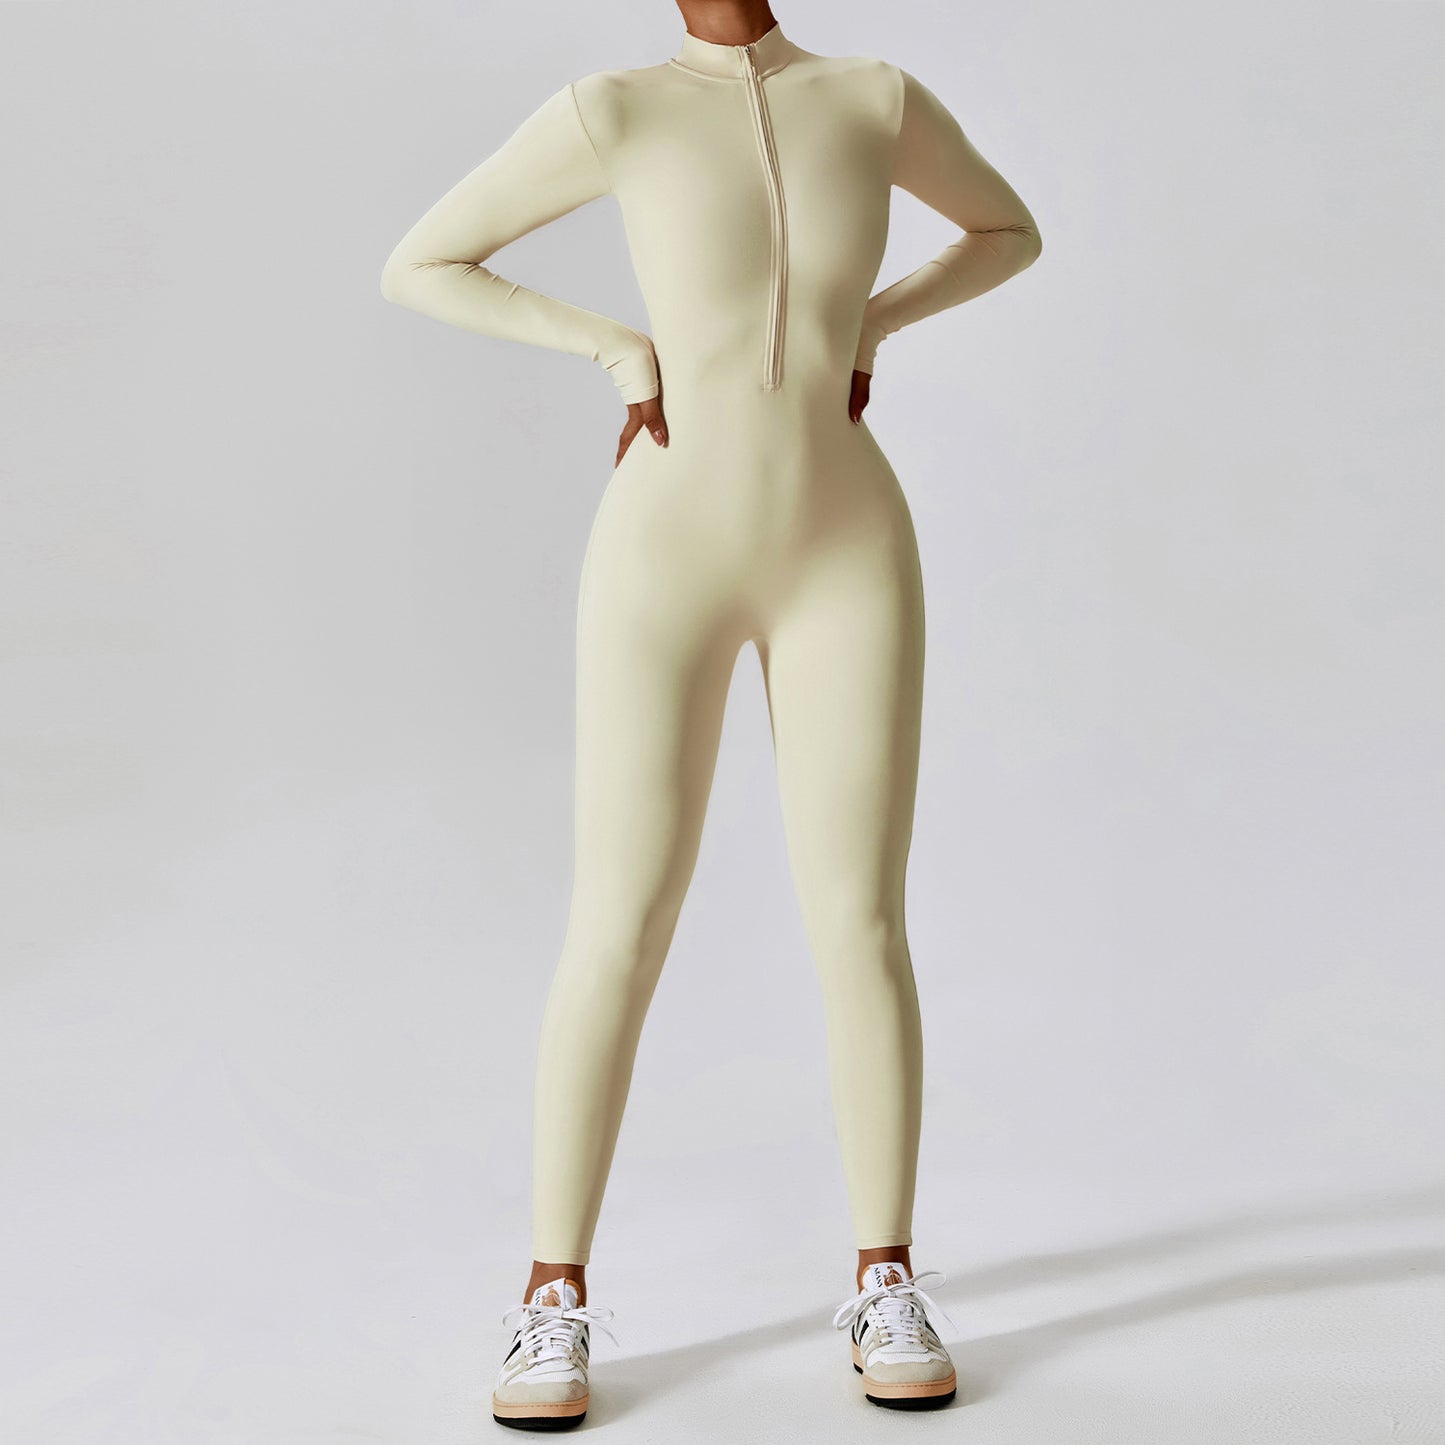 Zipper Nude Feel Long Sleeve Yoga Jumpsuit High Strength Fitness One Piece Tights